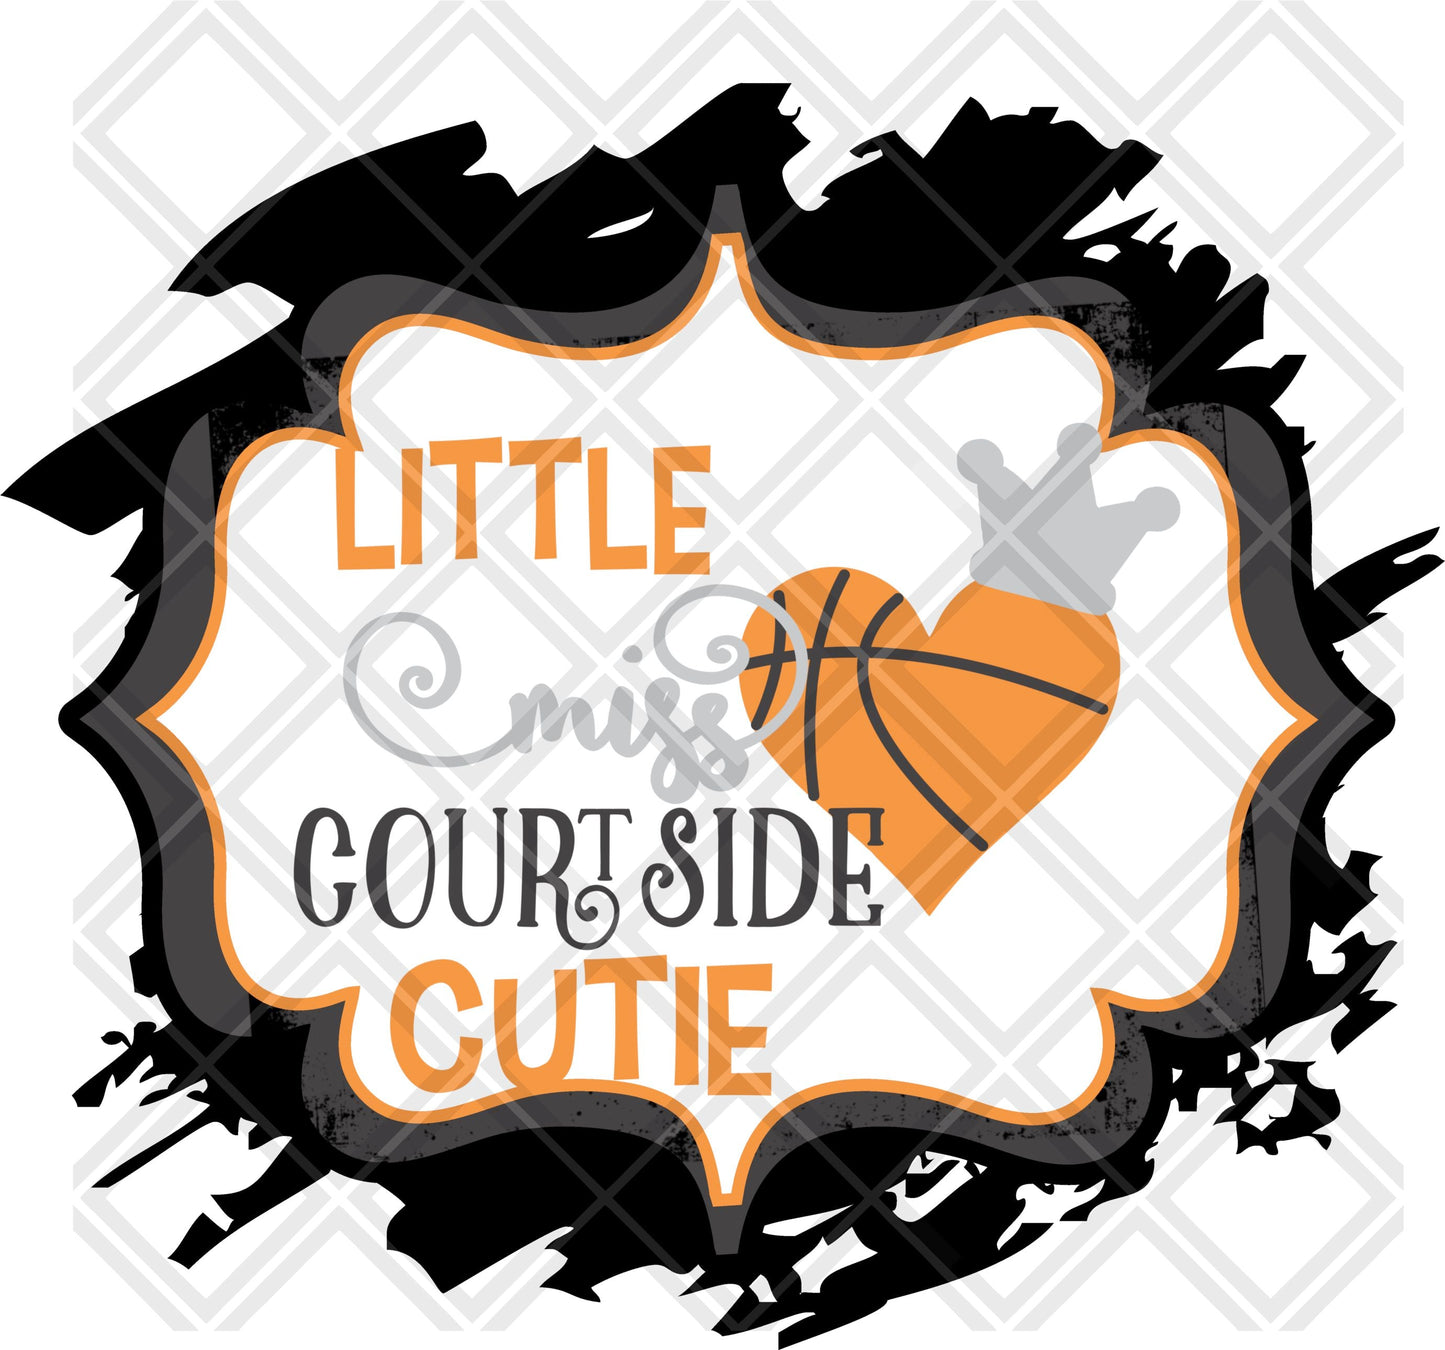 little miss courtside cutie png Digital Download Instand Download